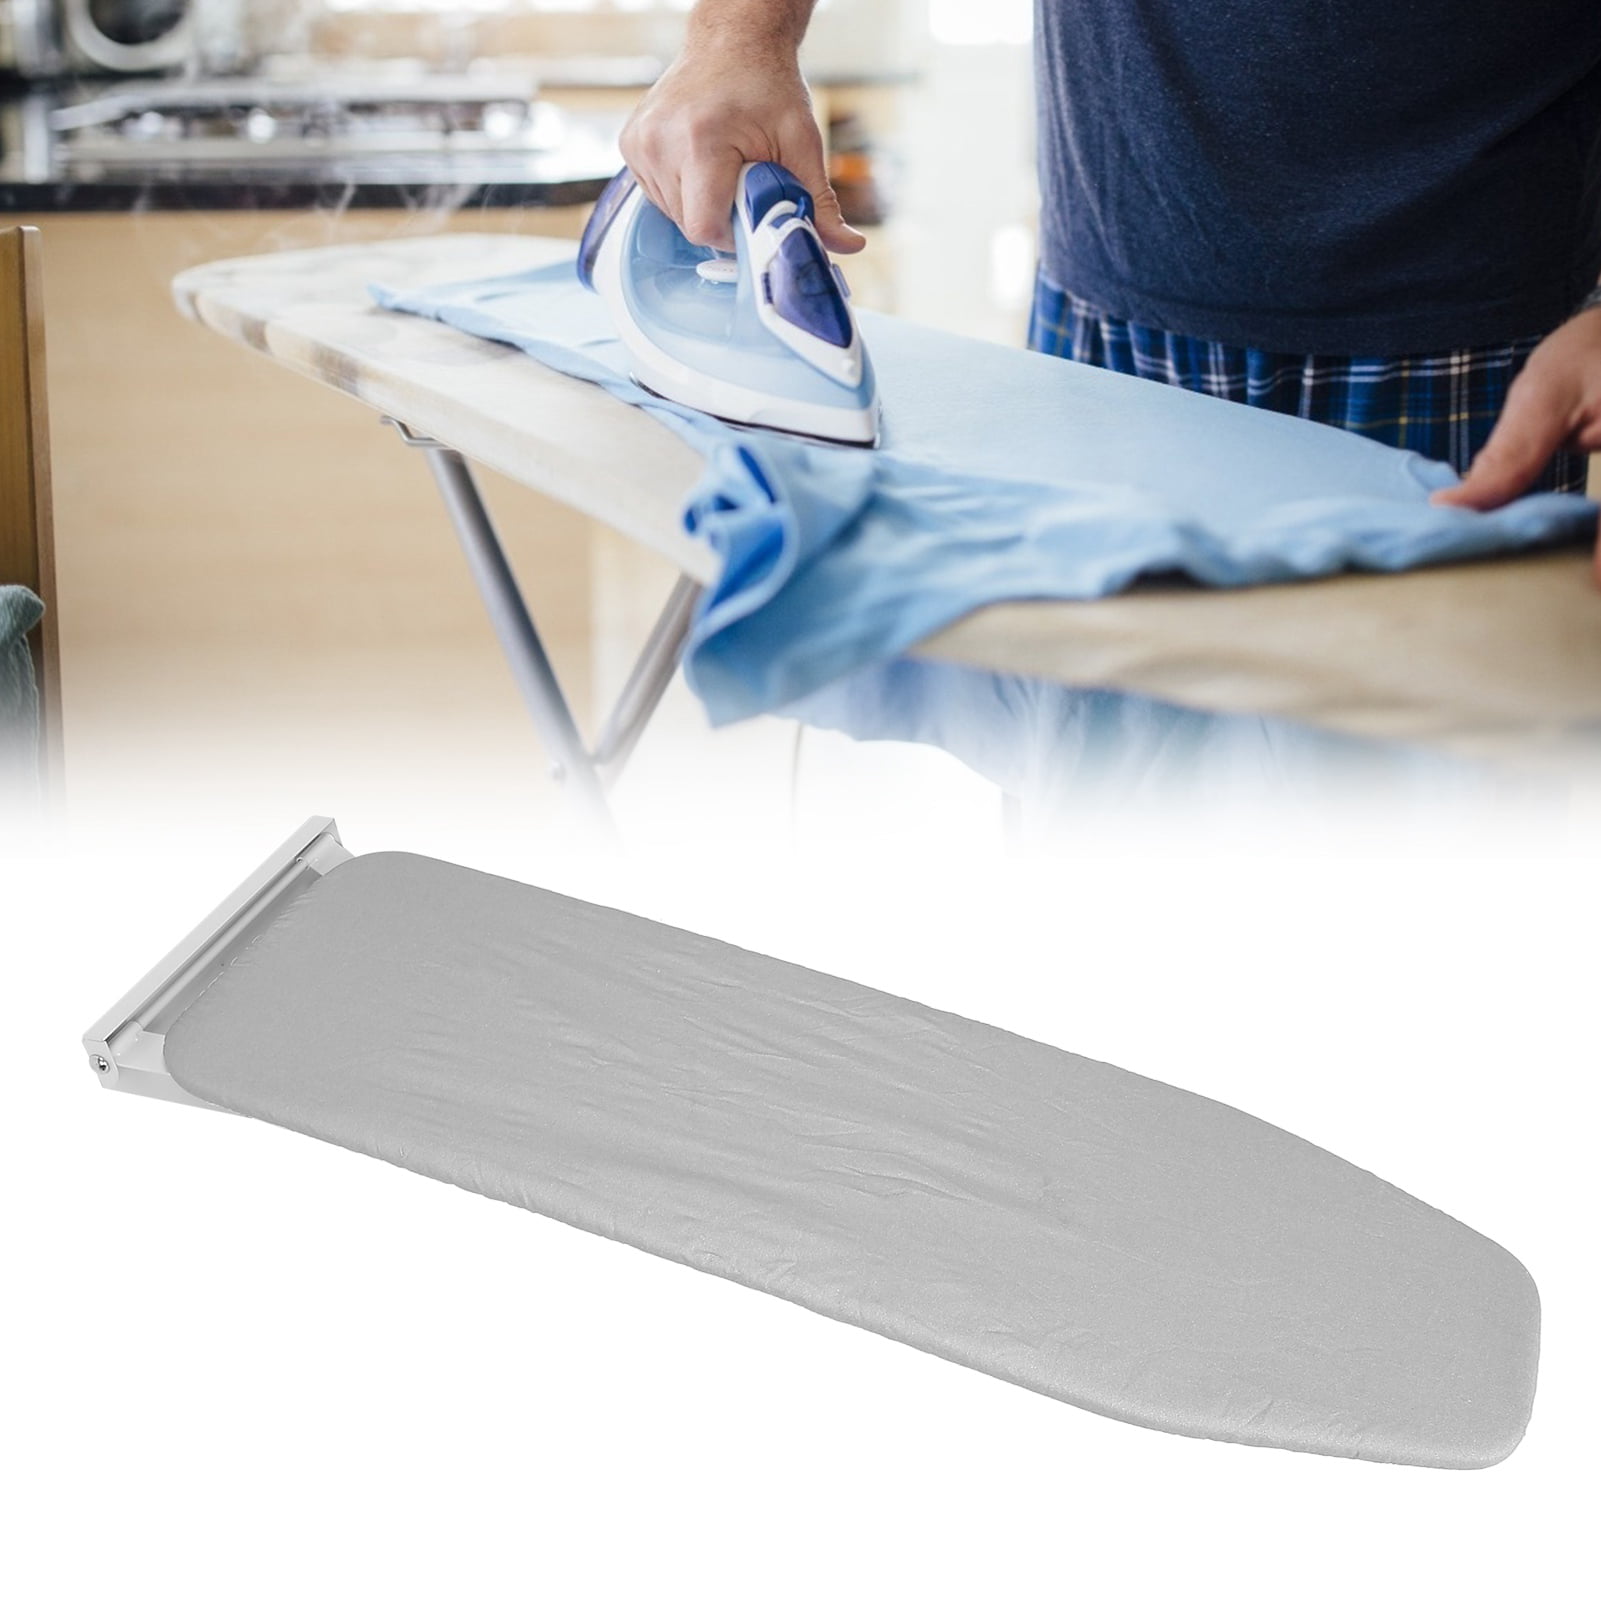 Details about   Latest Ironing Board Home Foldable Clothes Sleeve Cuffs Mini Table Saving Space 